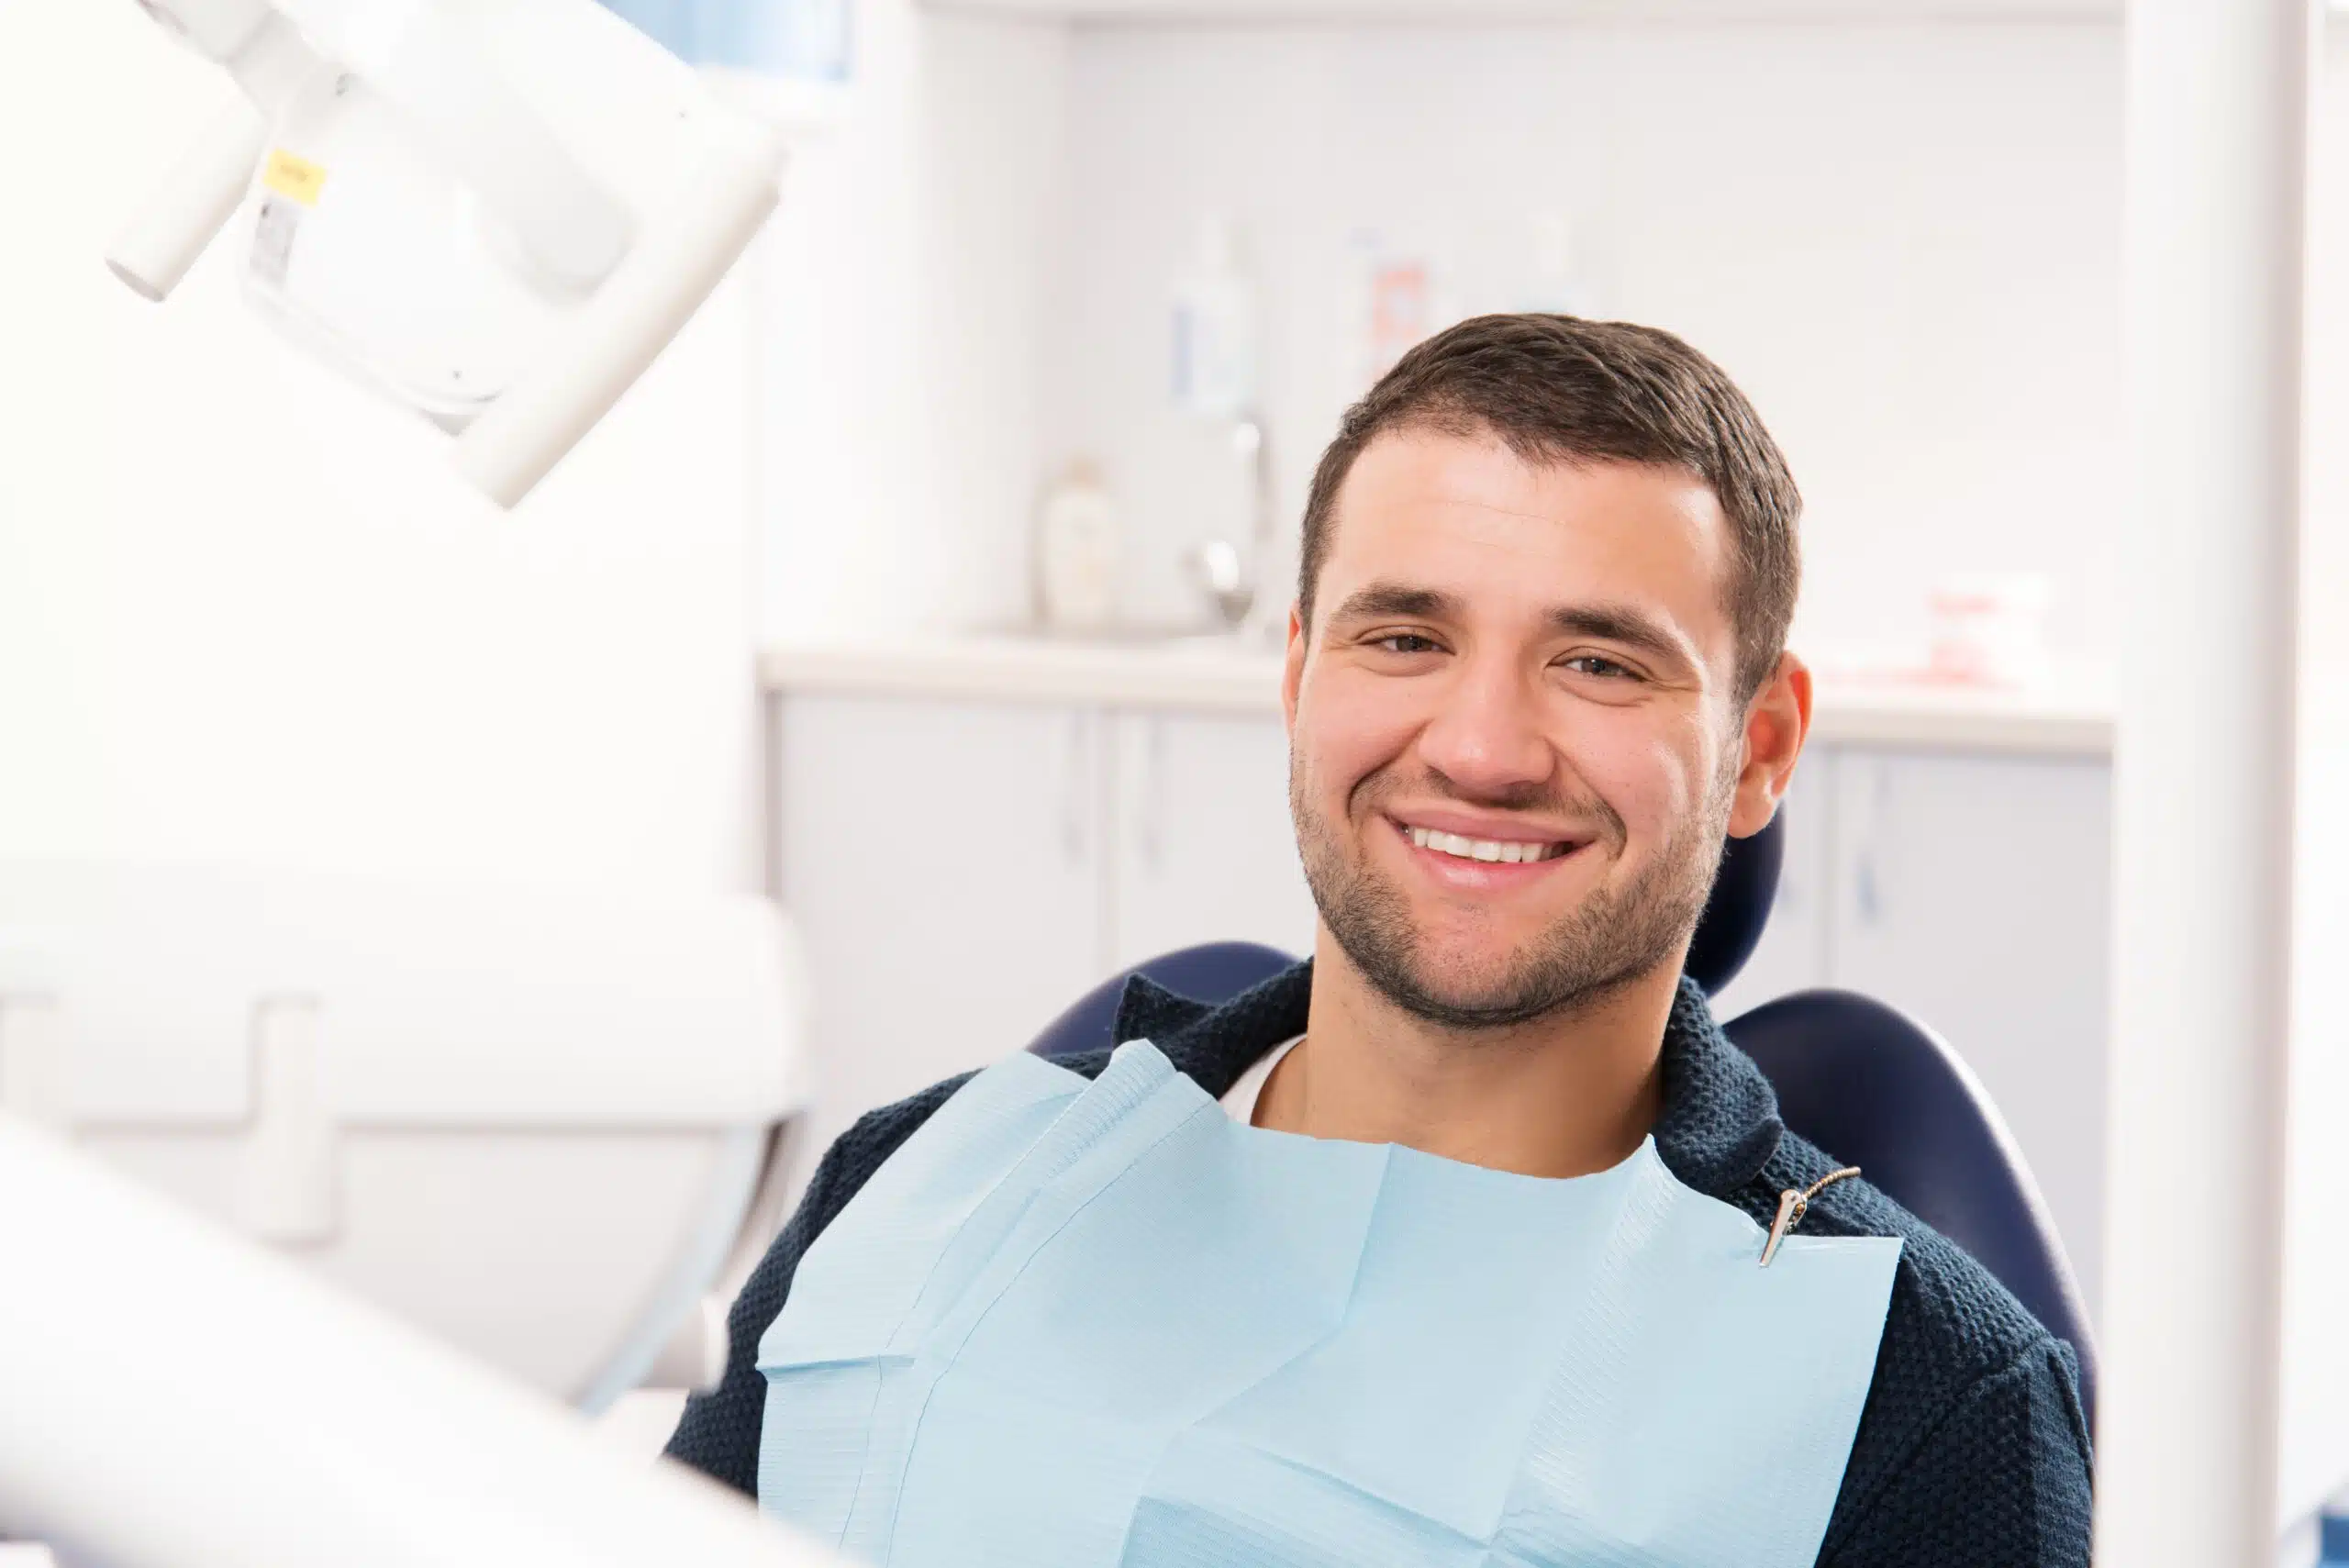 Restore your smile's function and appearance with our comprehensive restorative treatments.